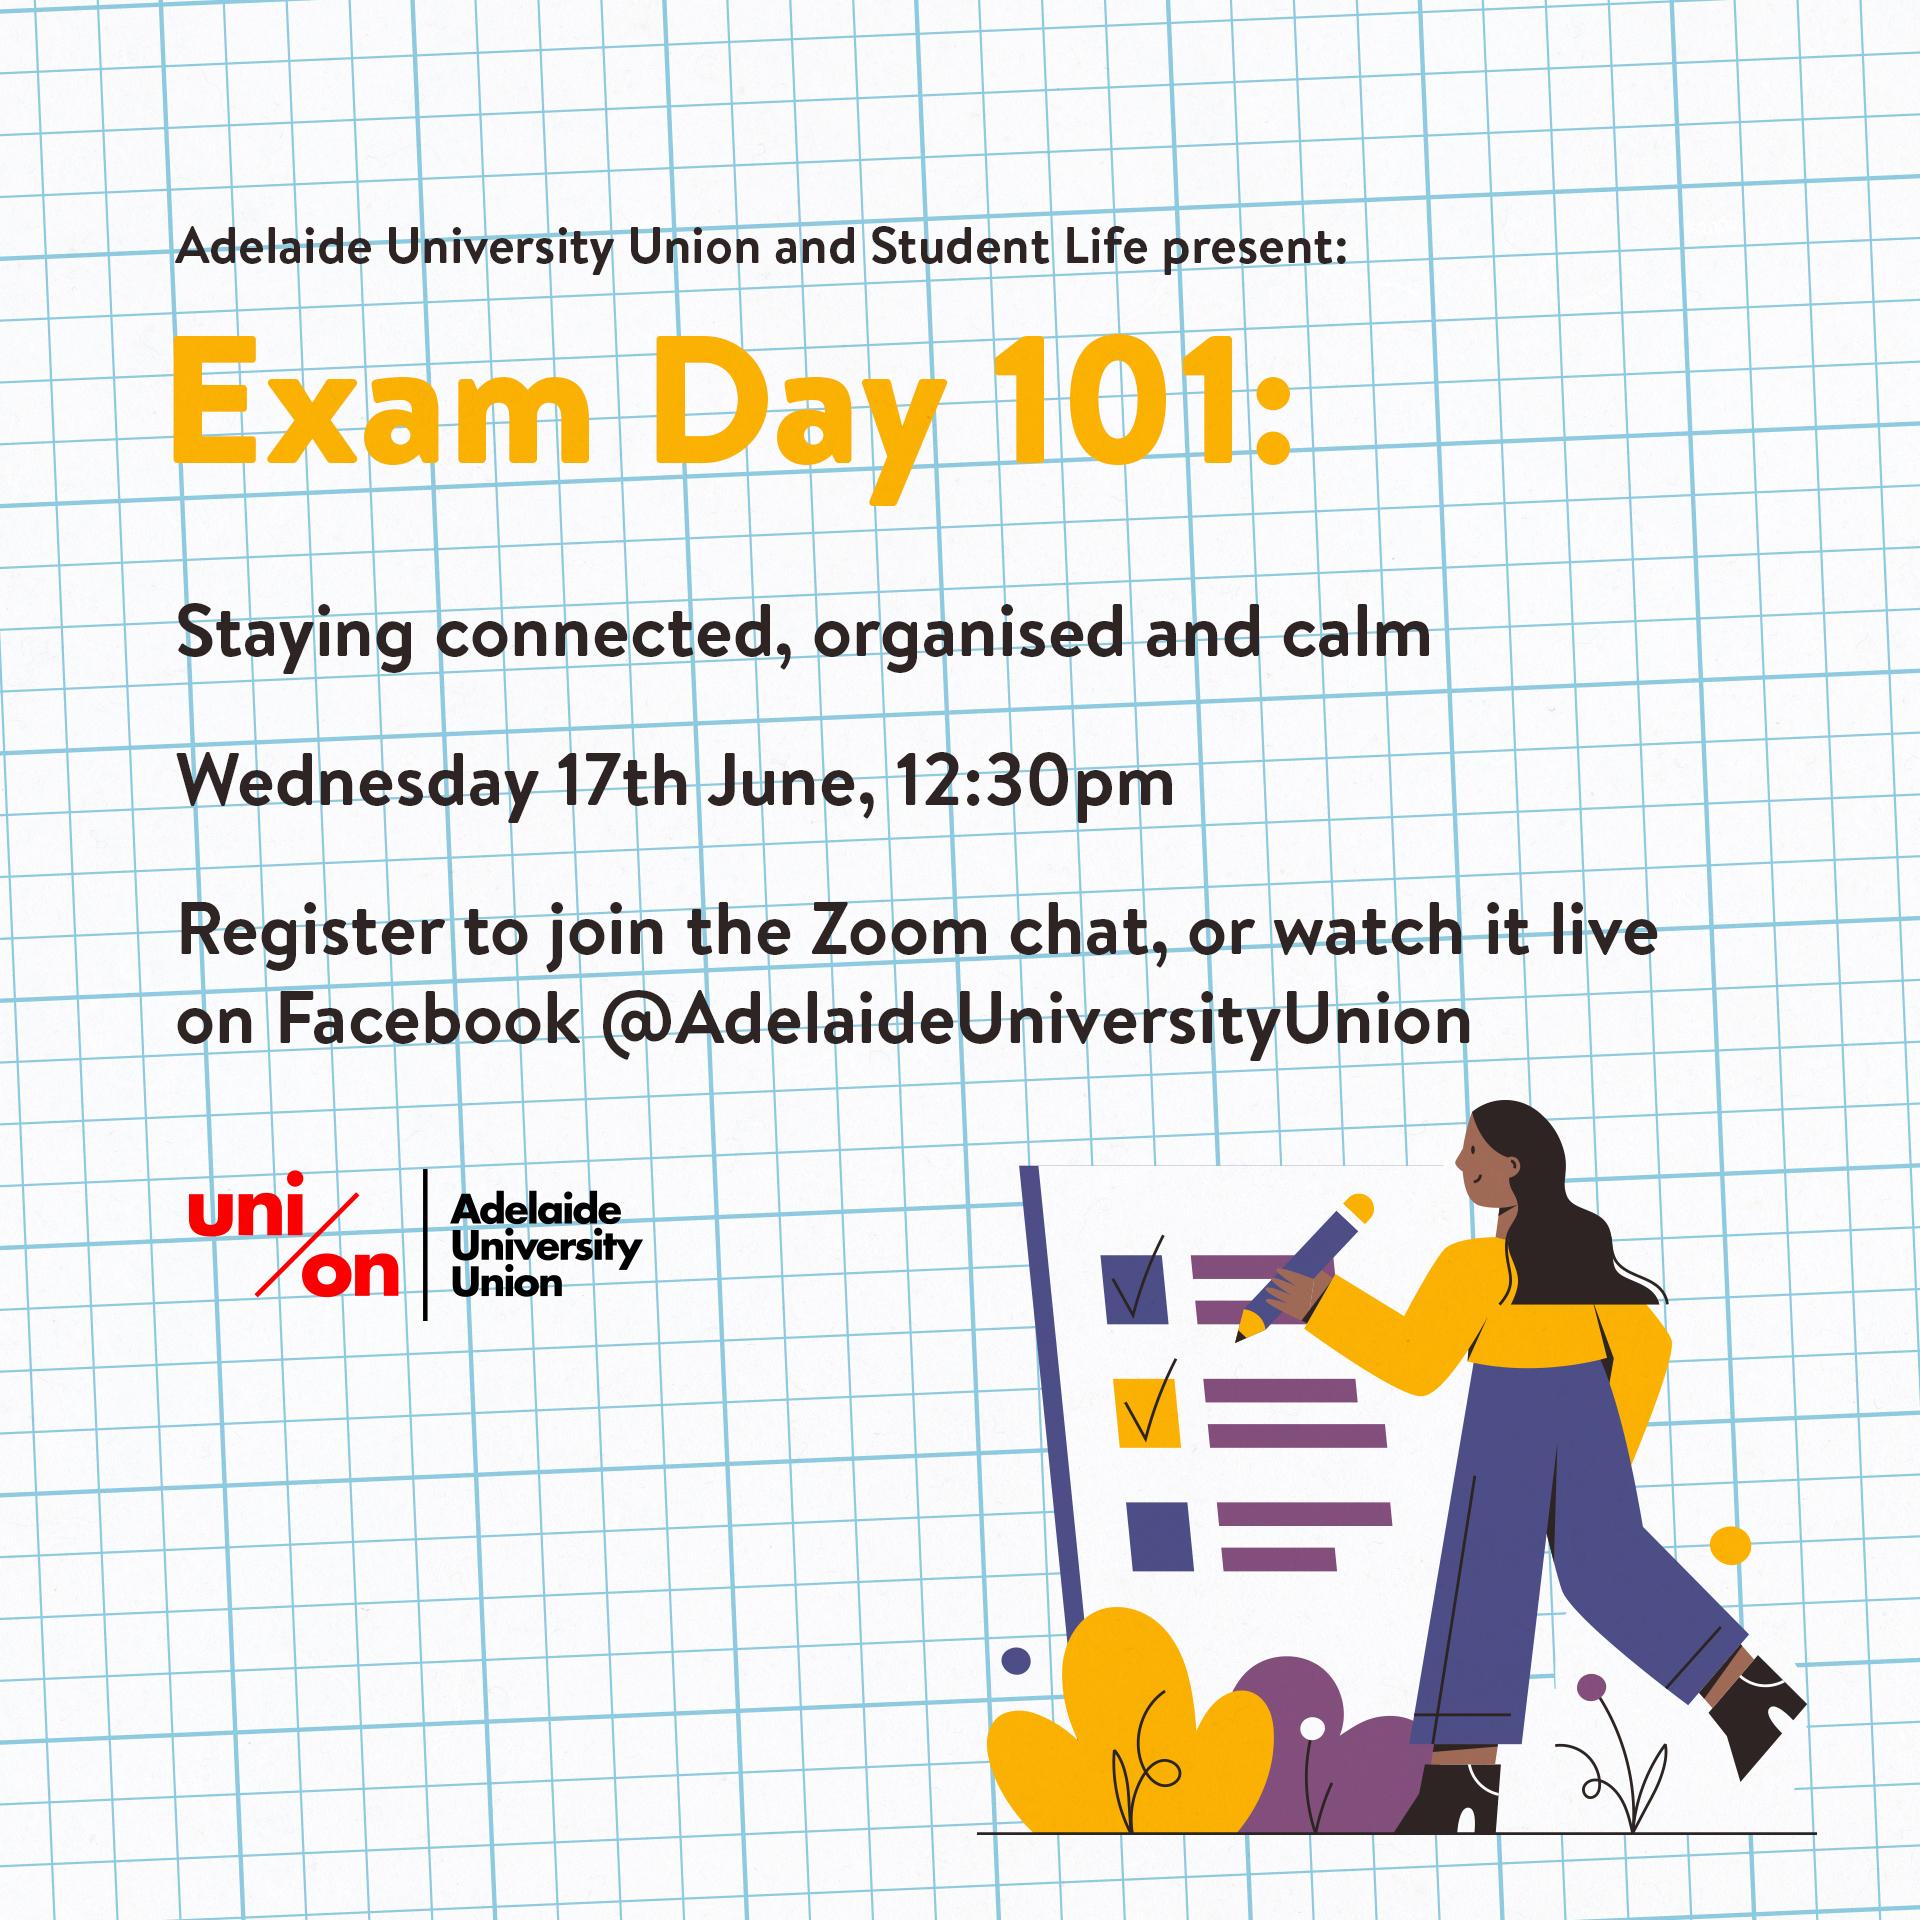 Image says: Adelaide University Union and Student Life present: Exam Day 1010. Staying Connected, organised and calm. Wed 17 June, 12.30pm. Register to join the Zoom chat or watch on Facebook.